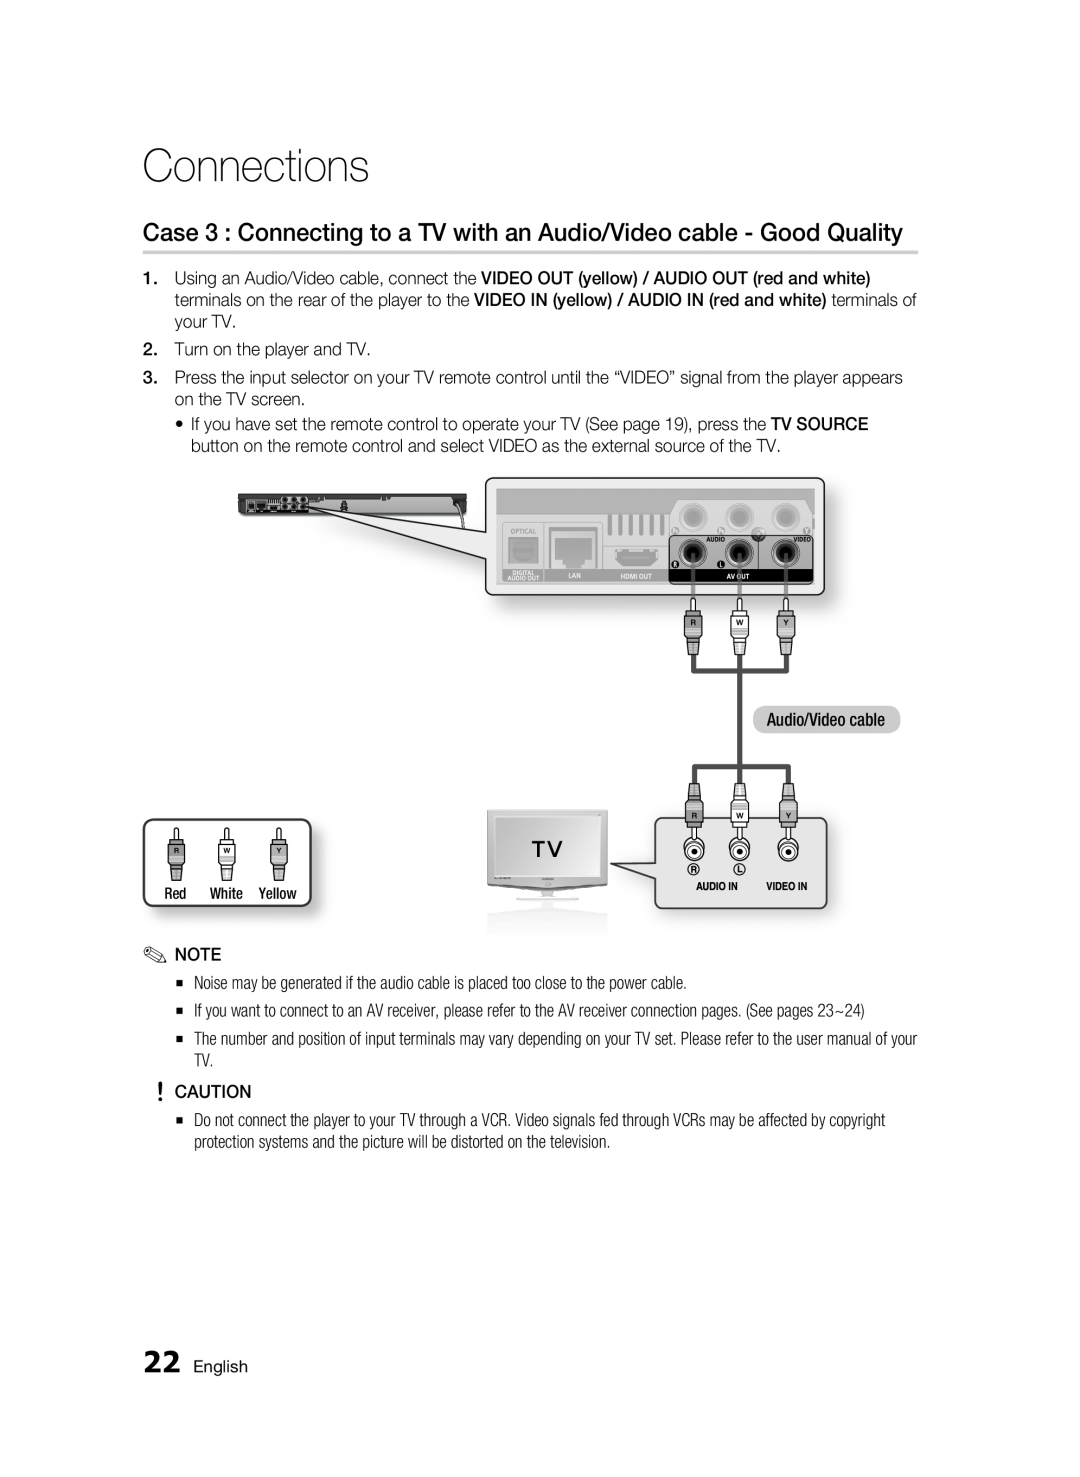 Samsung BD-D6500 user manual Case 3 Connecting to a TV with an Audio/Video cable - Good Quality, Connections, English 